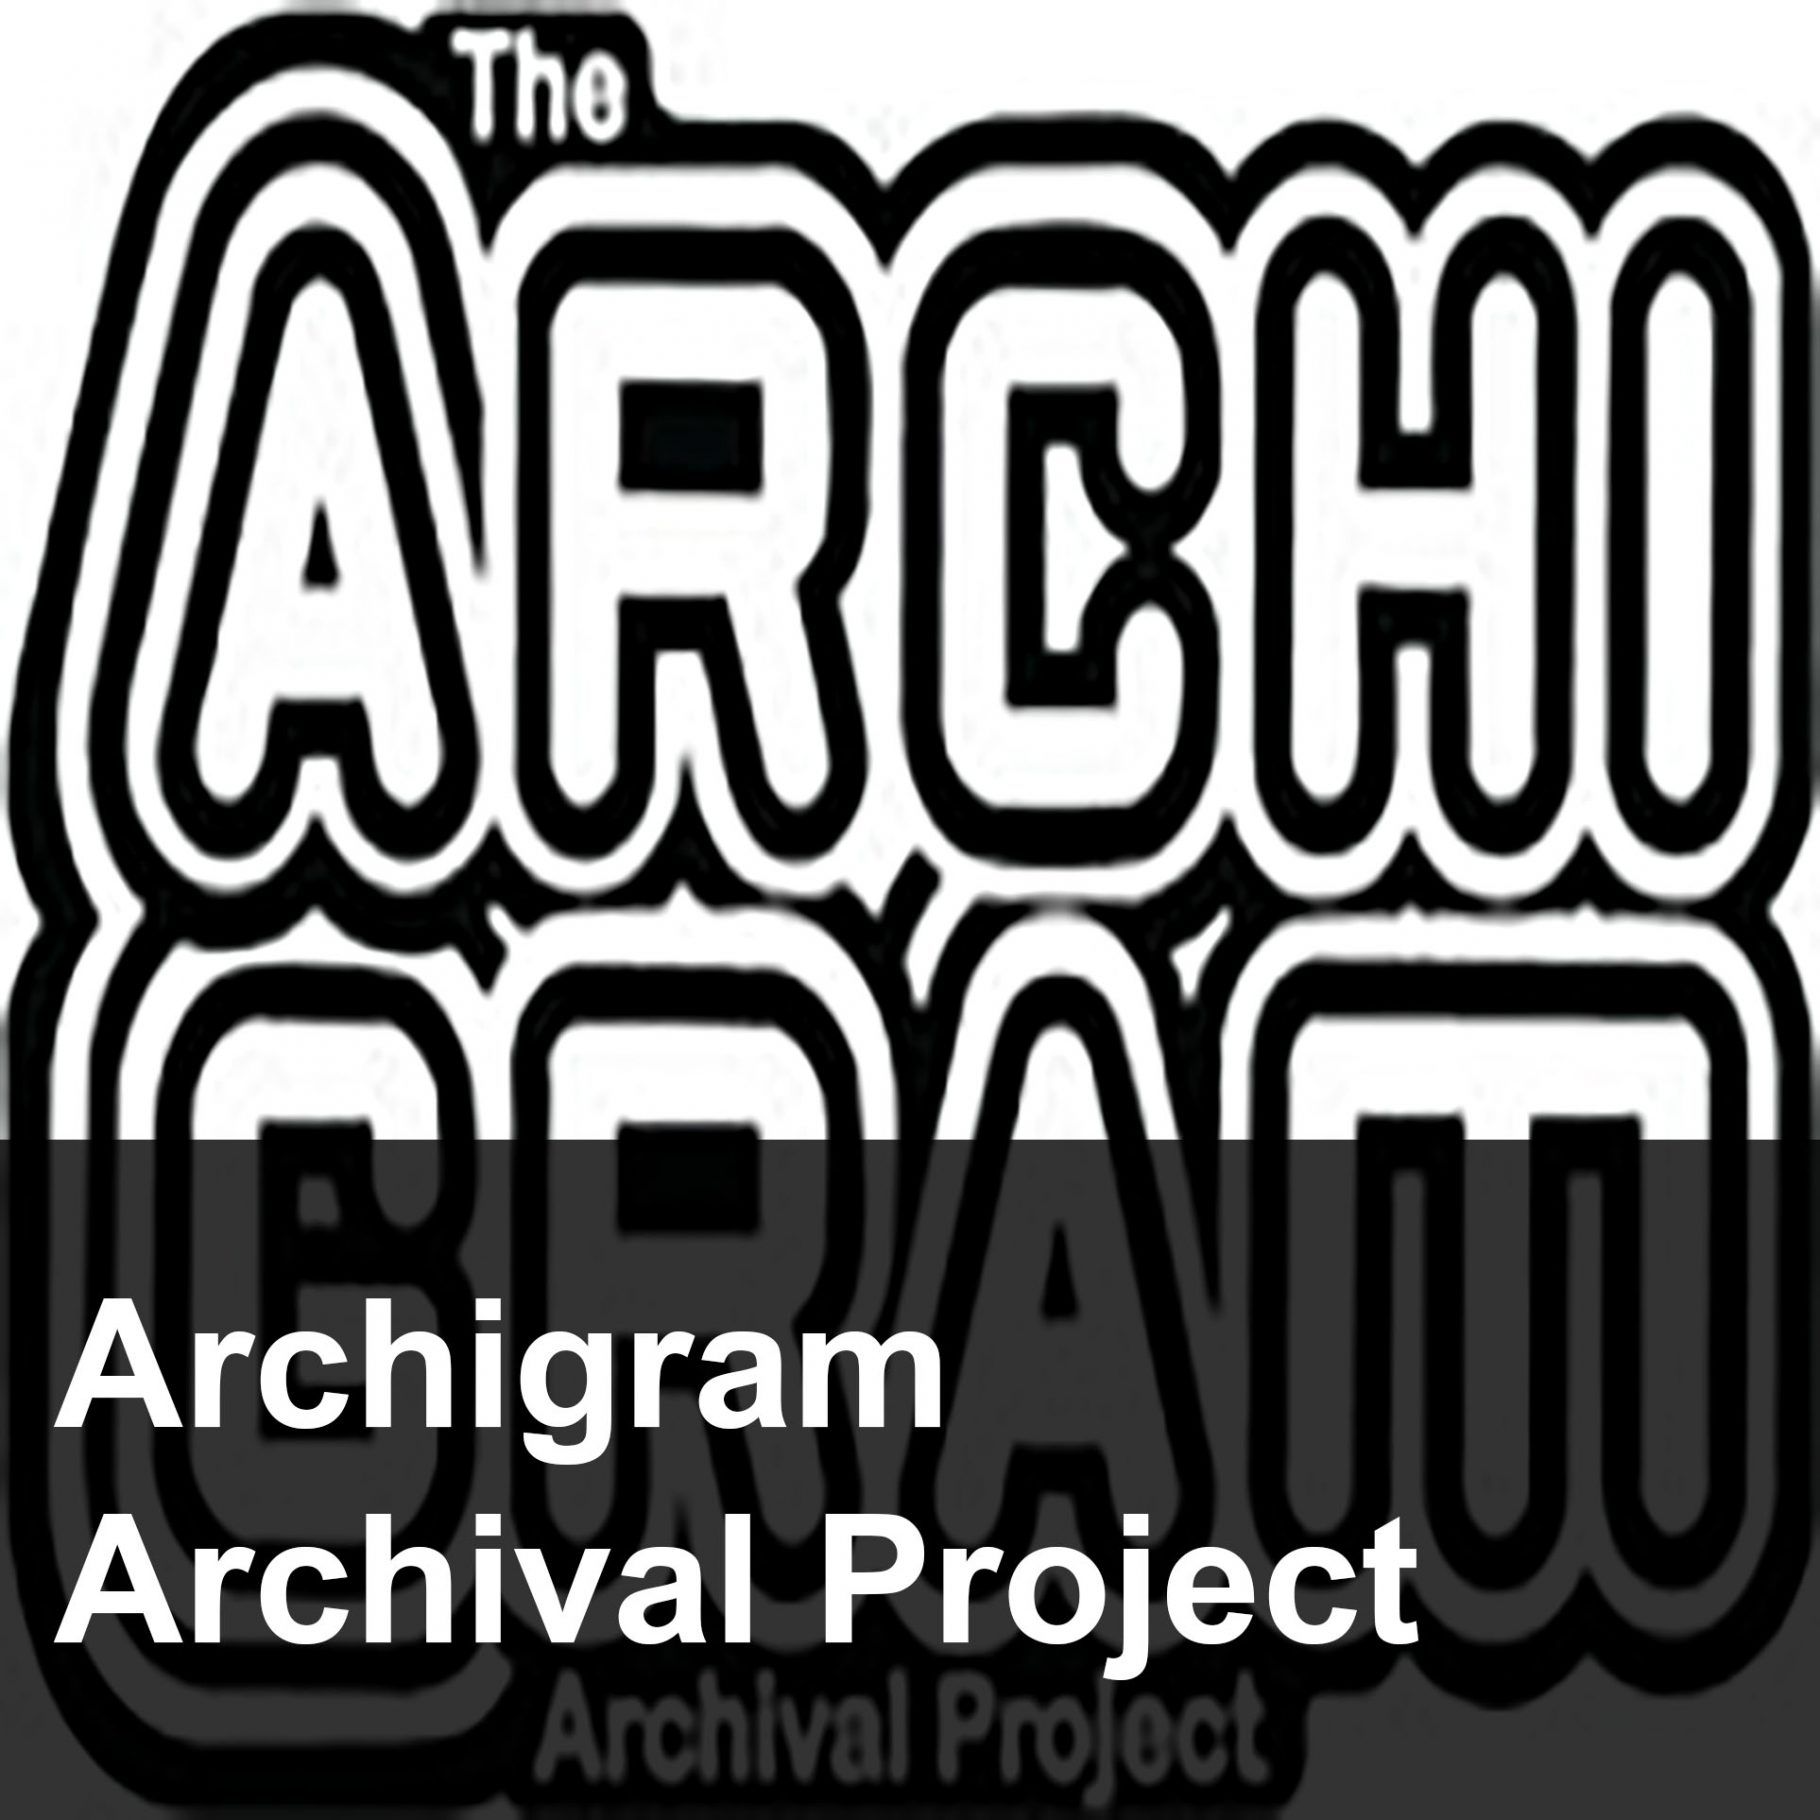 Link to Archigram Archival Project